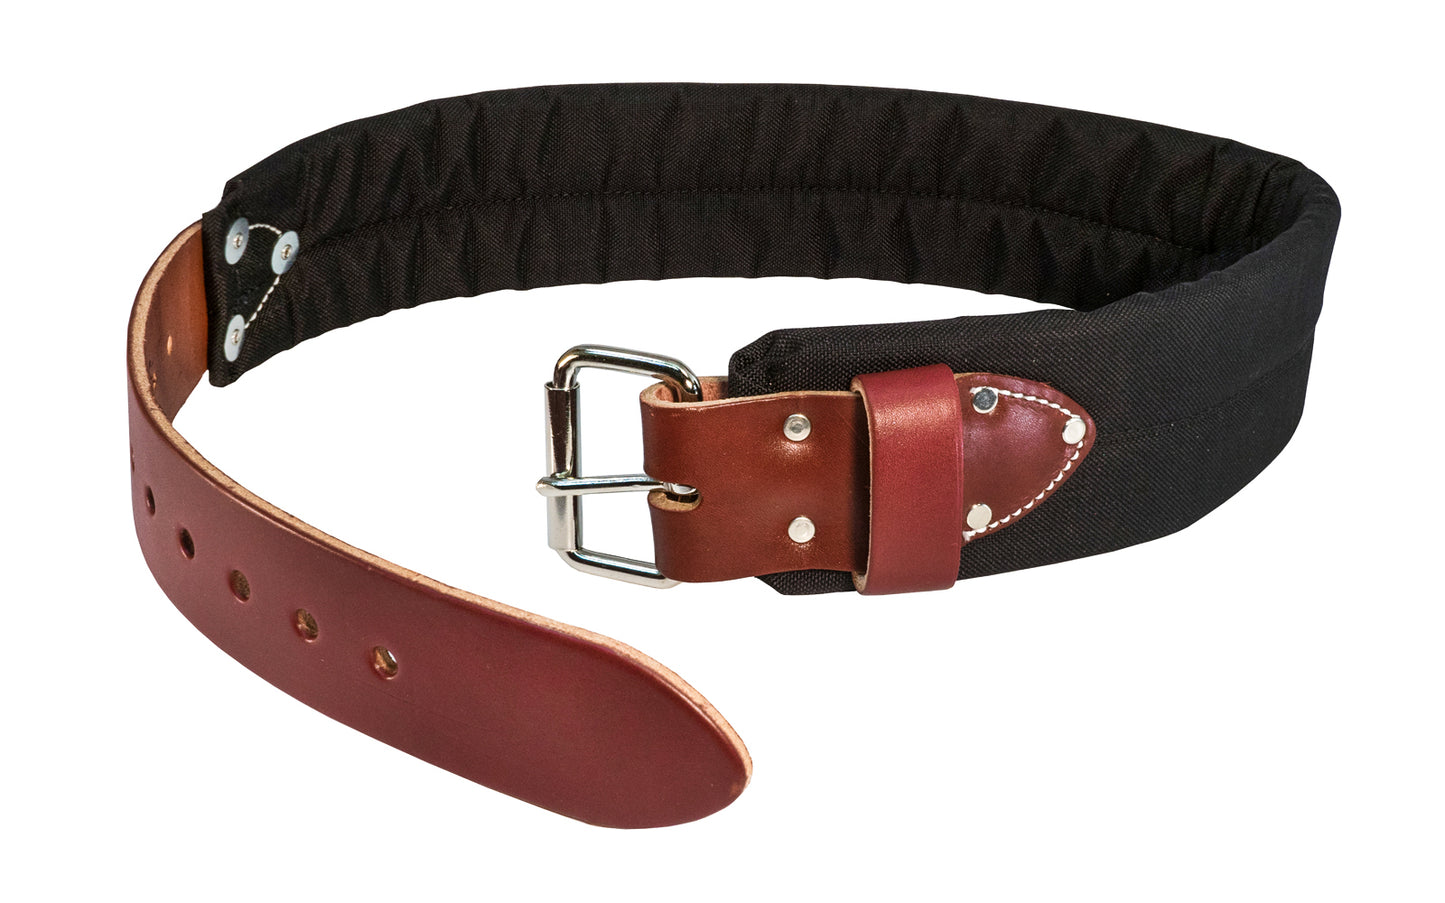 Occidental Leather Nylon & Leather Work Belt ~ Model 8003L - Made of genuine leather & Nylon - Made in USA  - 759244035209 - Large Occidental Padded Belt - Leather Work Belt - 3" wide - Large Buckle - high quality nylon leather - Edge stitched for quality, appearance & strength - 8003 L - 41" Mid range - 48" Length